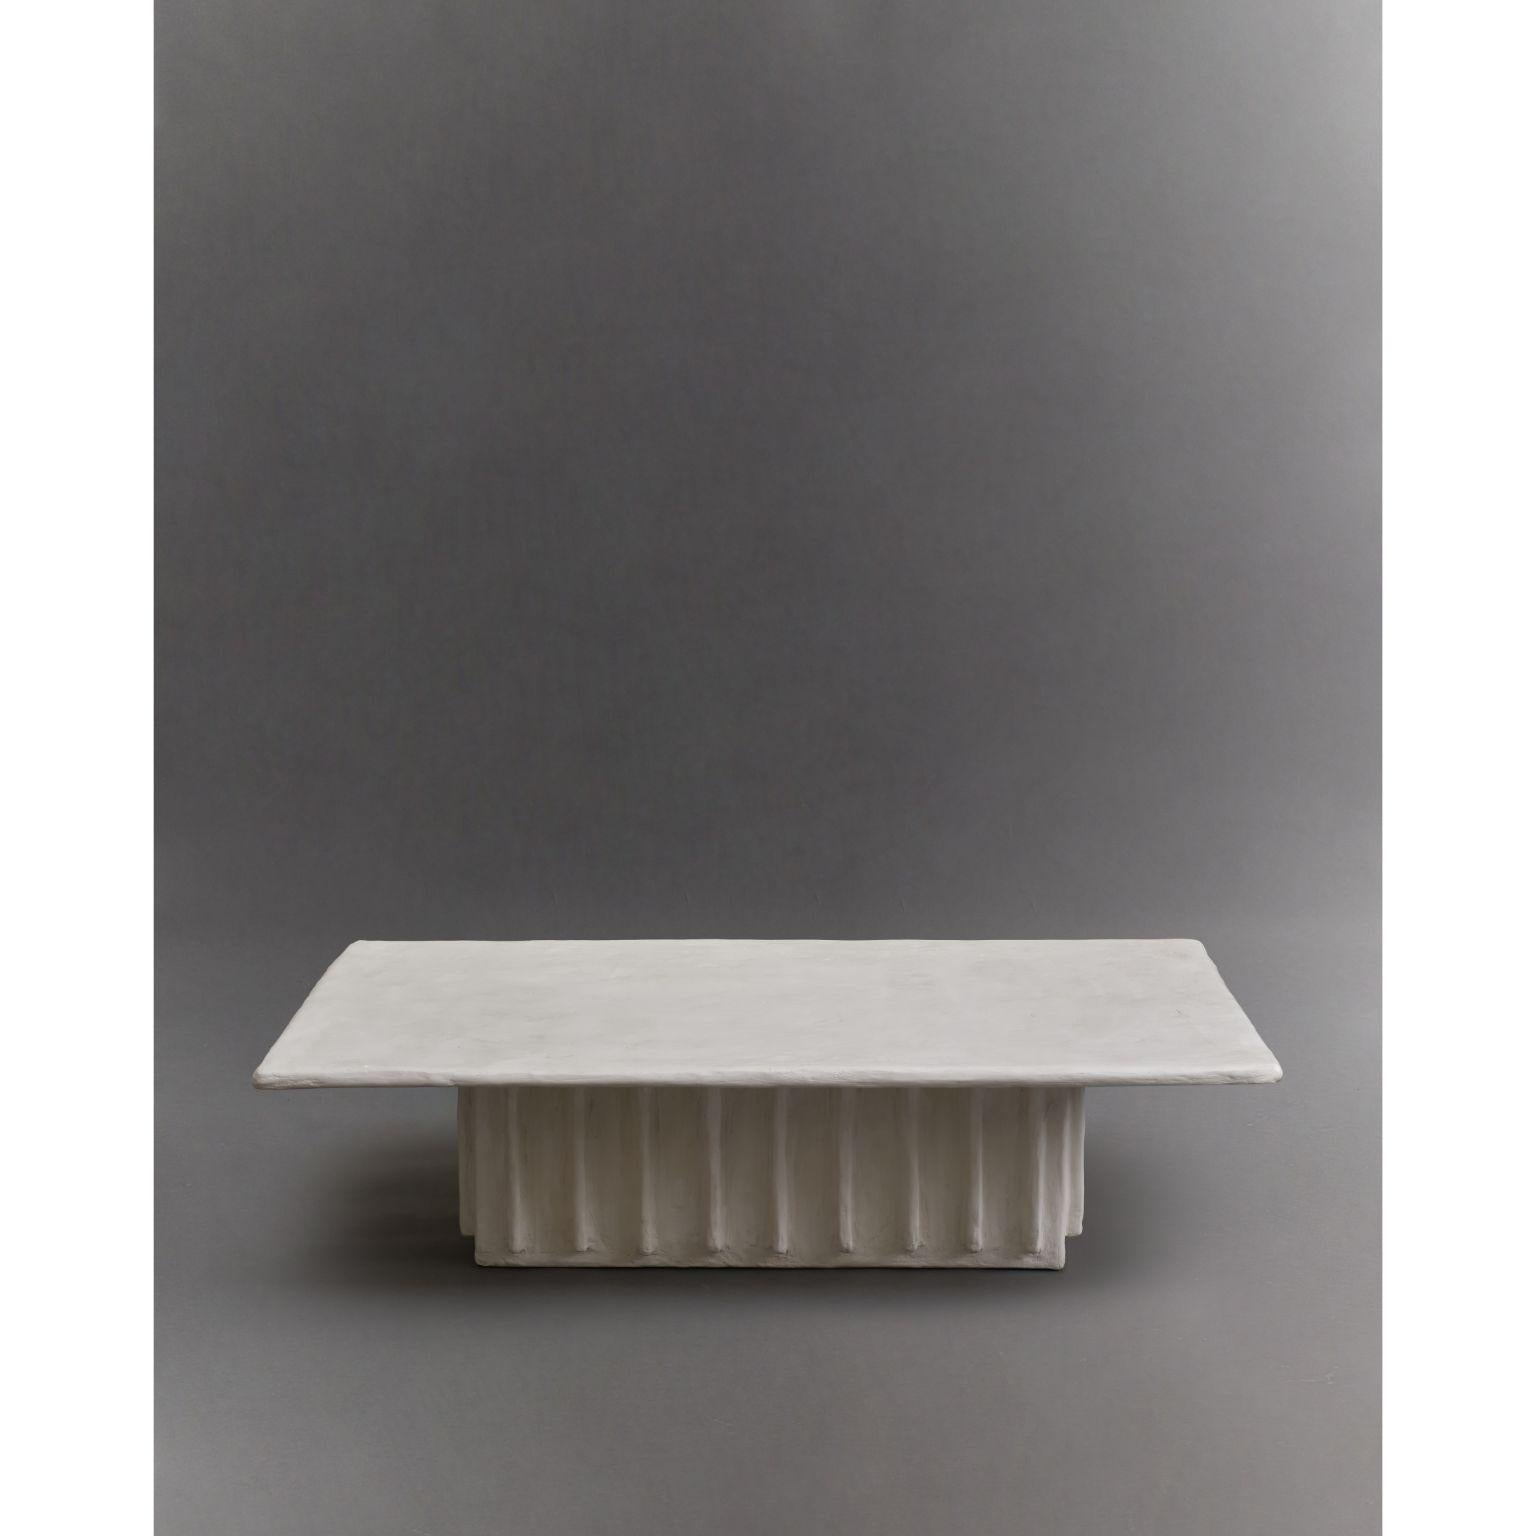 Columnar coffee table by Ombia
Dimensions: W 122 x D 71.5 x H 30.5 cm
Materials: White raw plaster finish. 
Custom colors upon request.


Ombia is a ceramic sculpture and design studio based in Los Angeles. The name and its roots originates